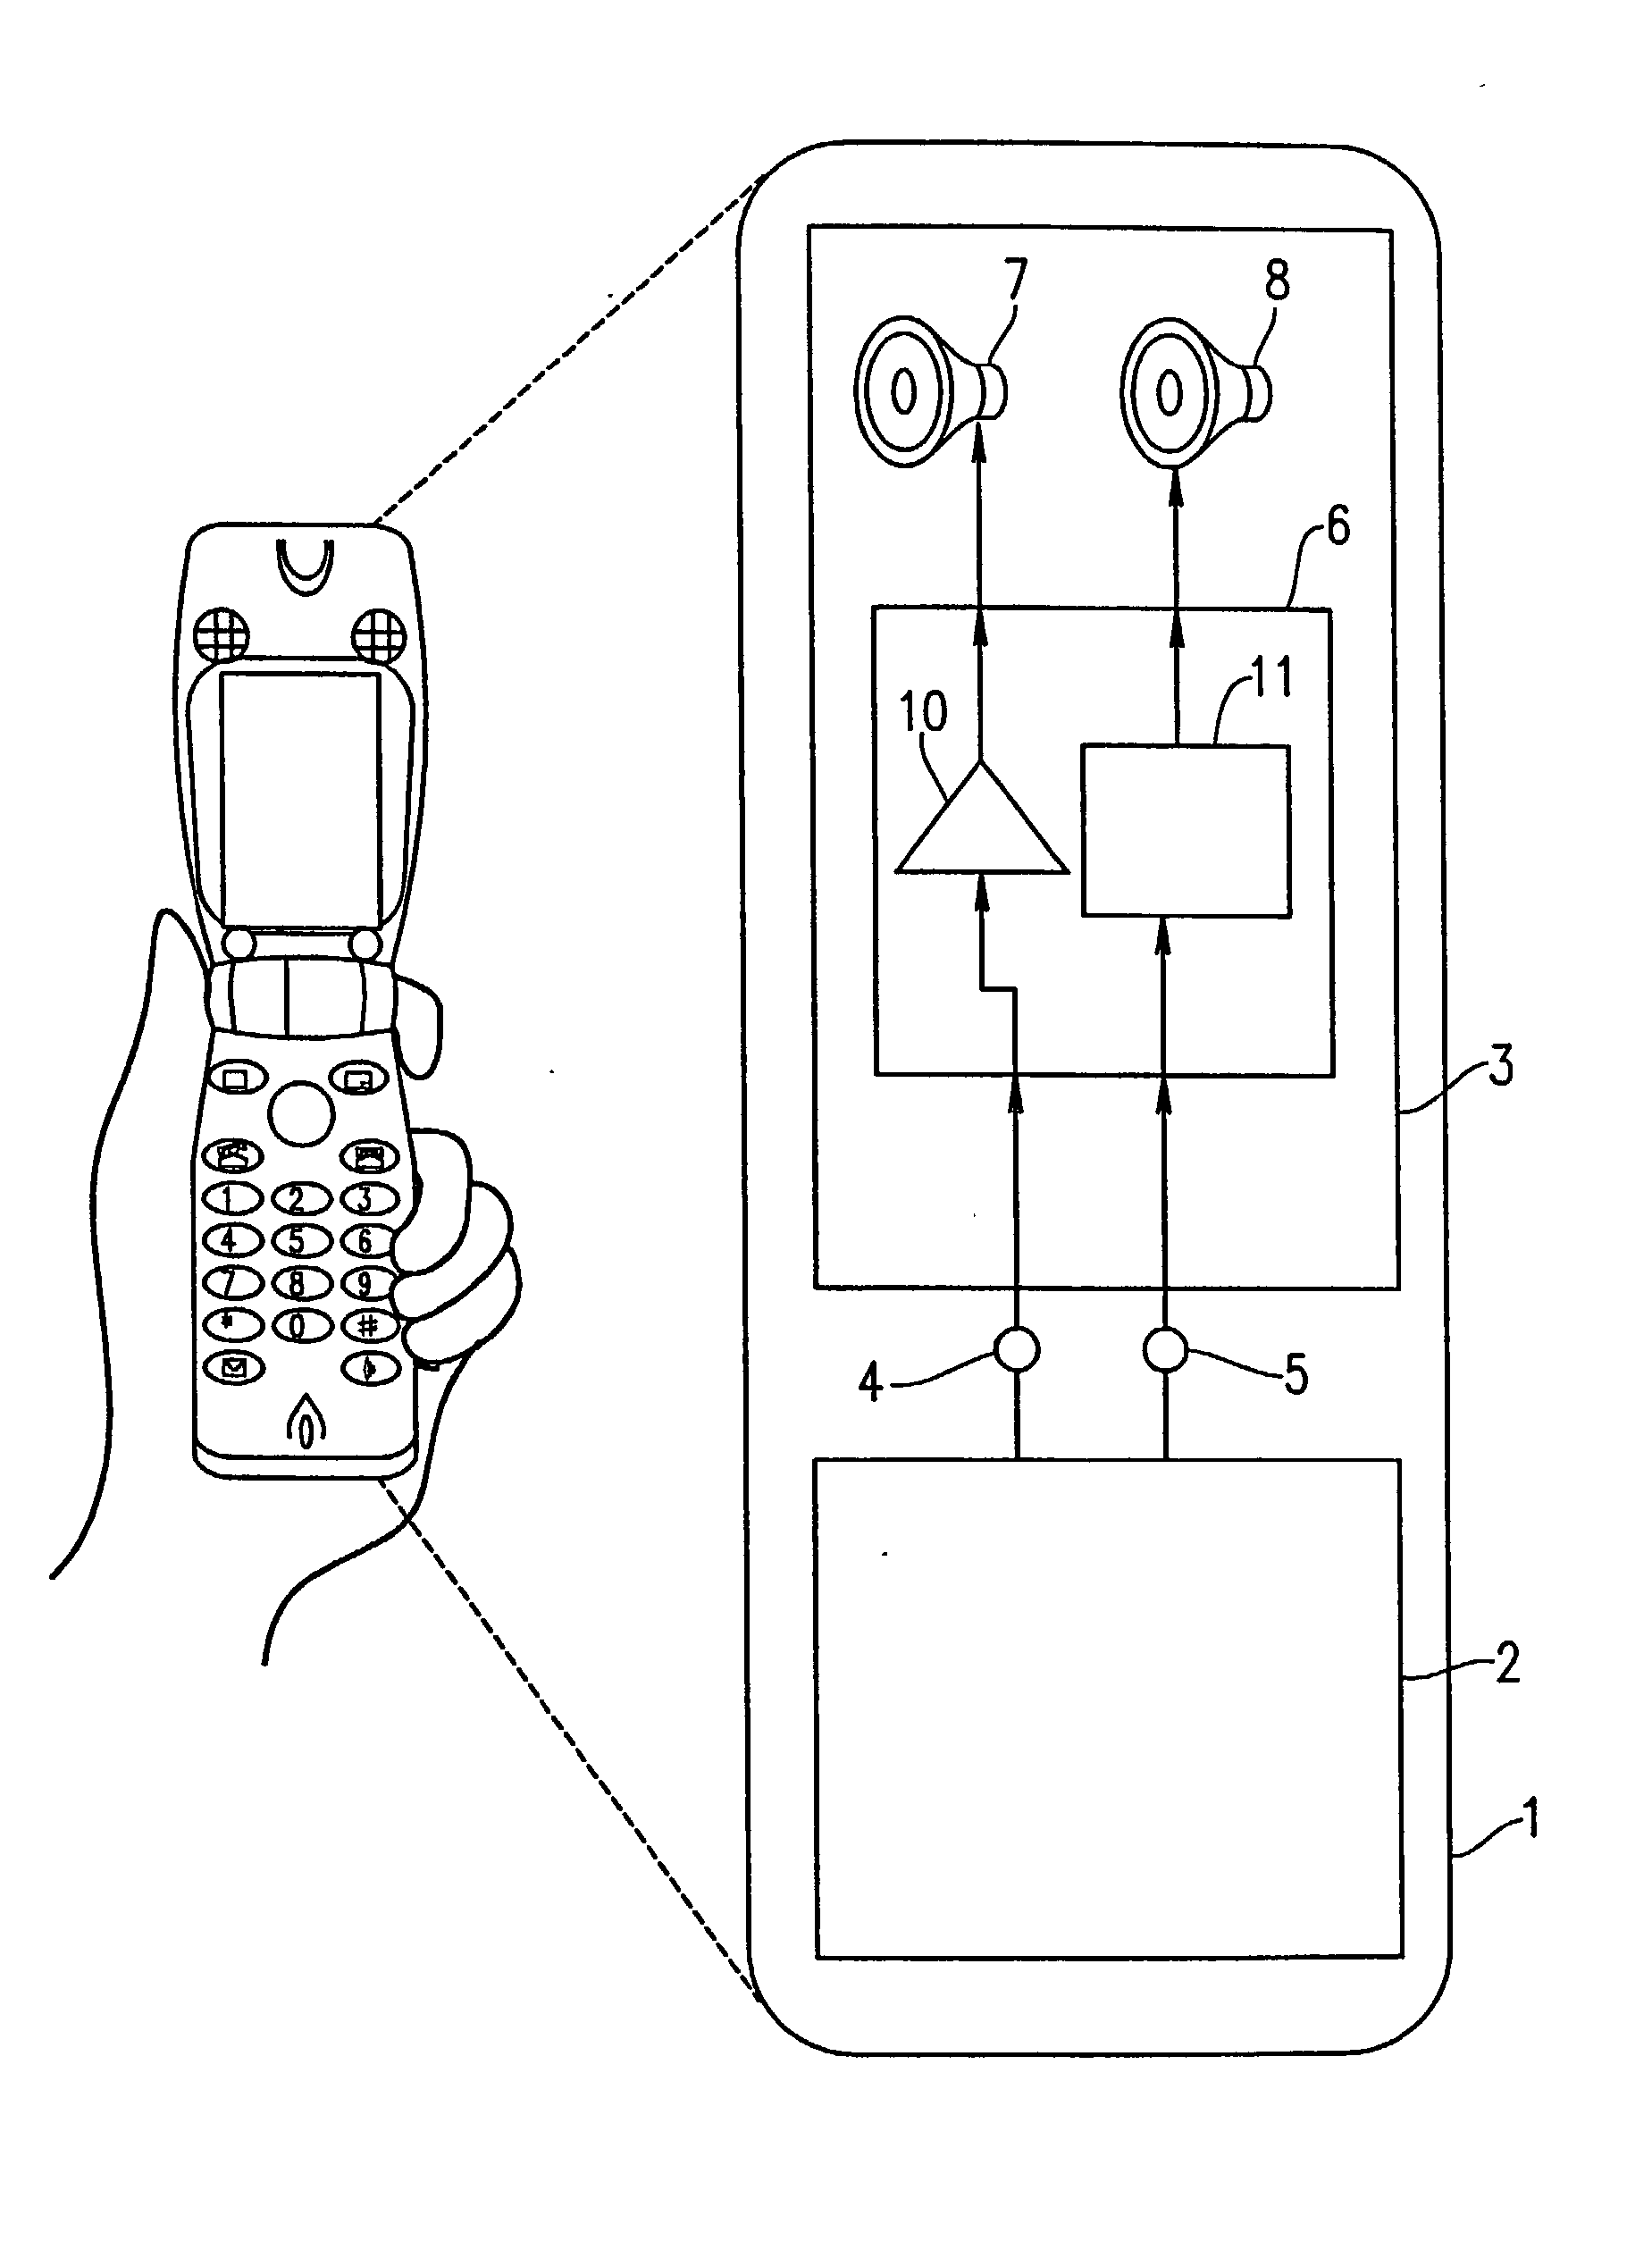 Sound reproduction device